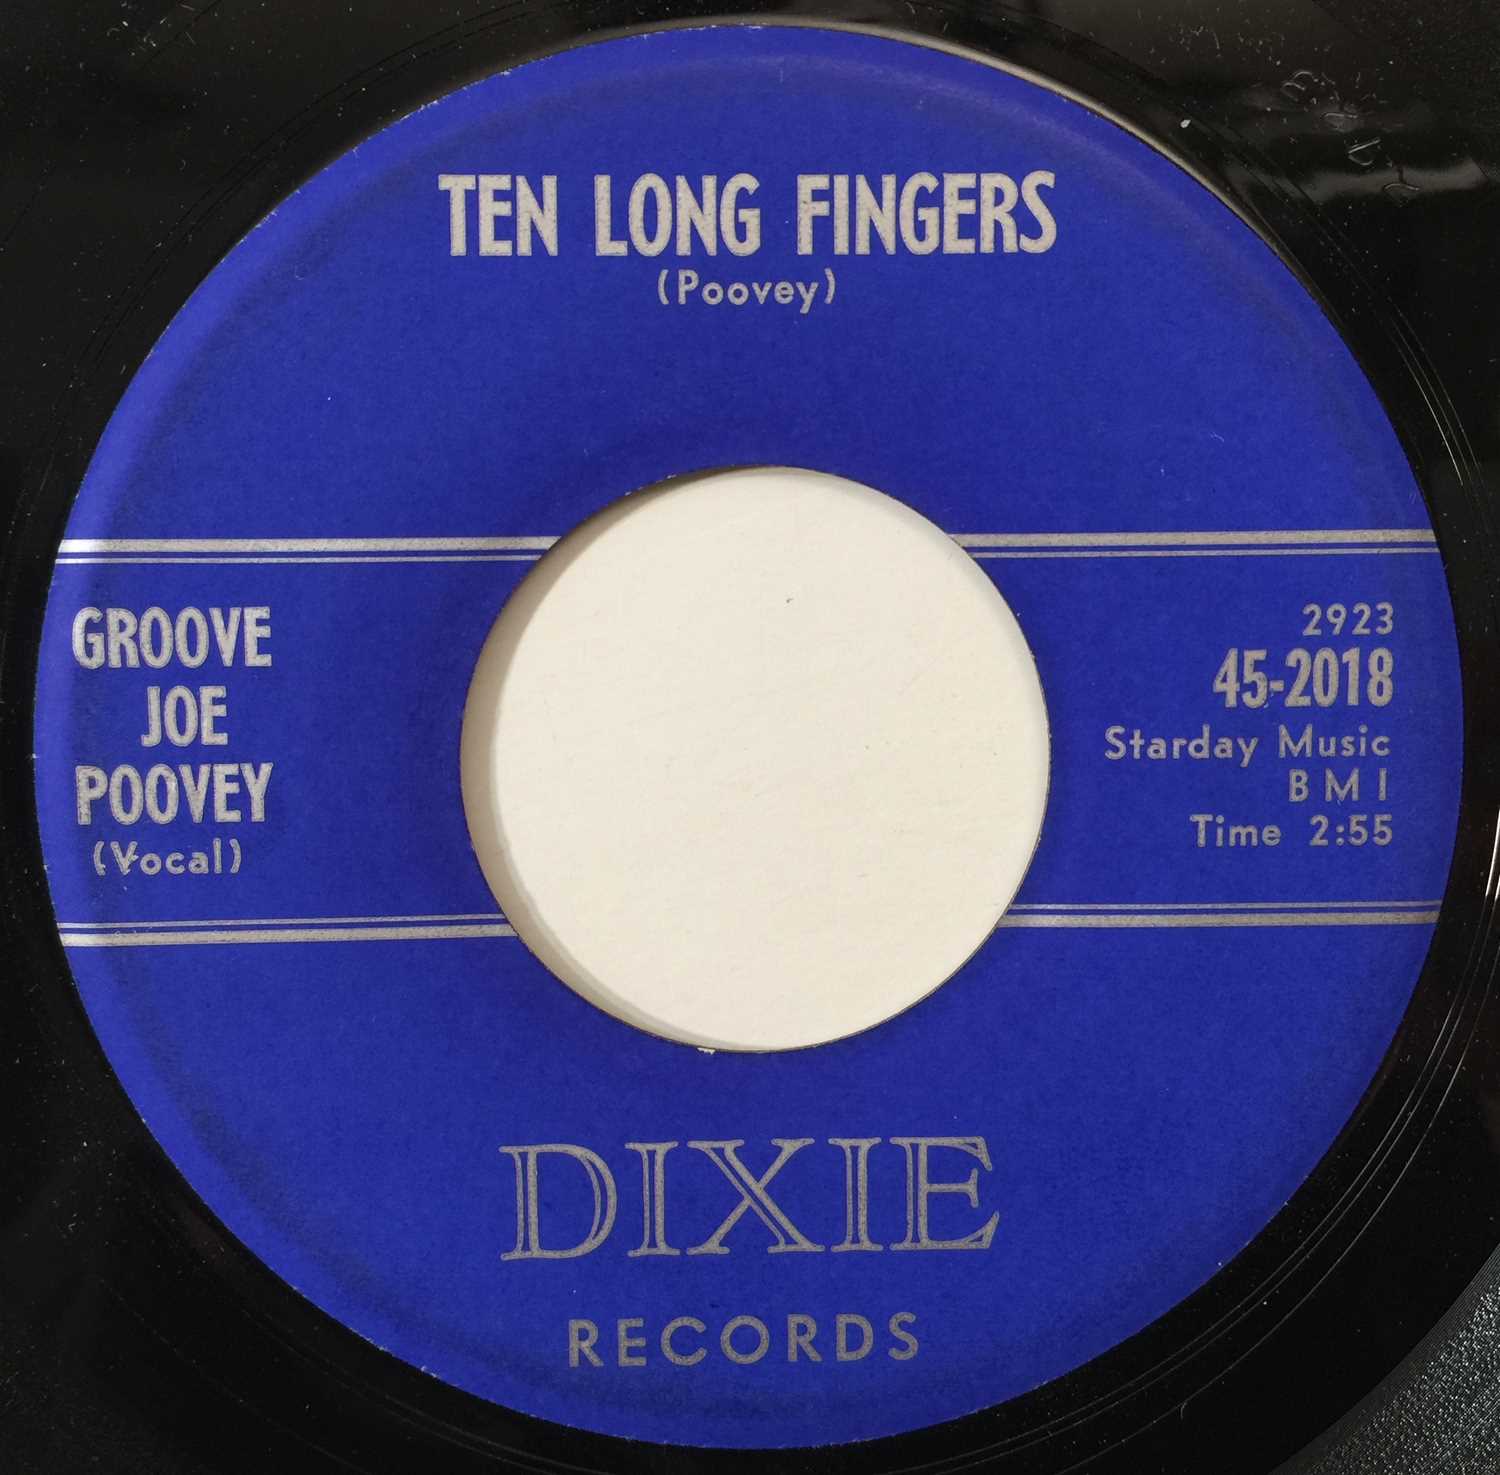 Lot 25 - GROOVE JOE POOVEY - TEN LONG FINGERS/ THRILL OF LOVE 7" (US R&R - DIXIE 45-2018)